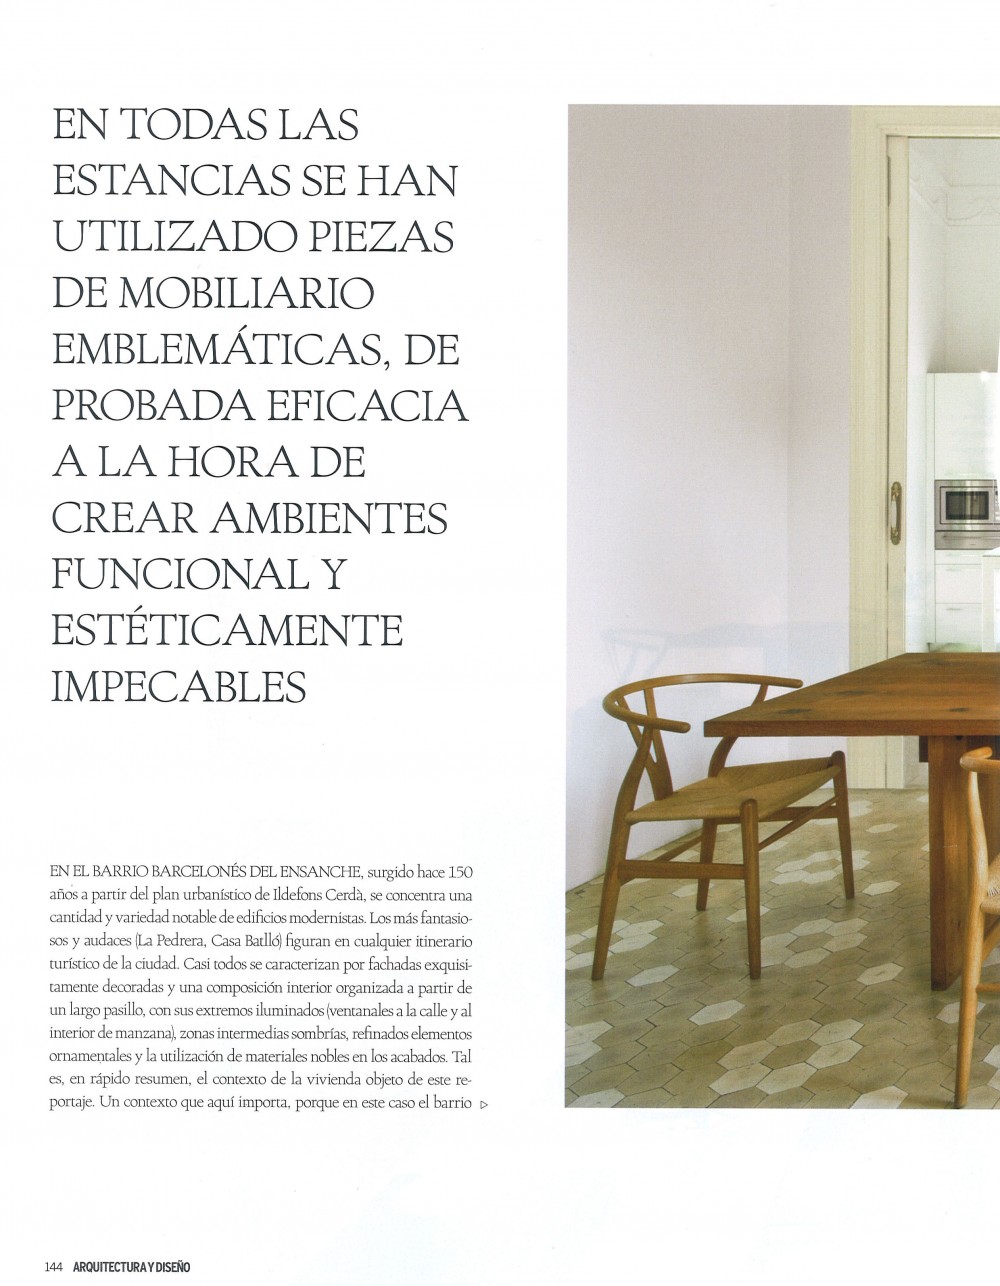 Arquitectura y Diseño 108.,Renovation project of housing in the Eixample of Barcelona